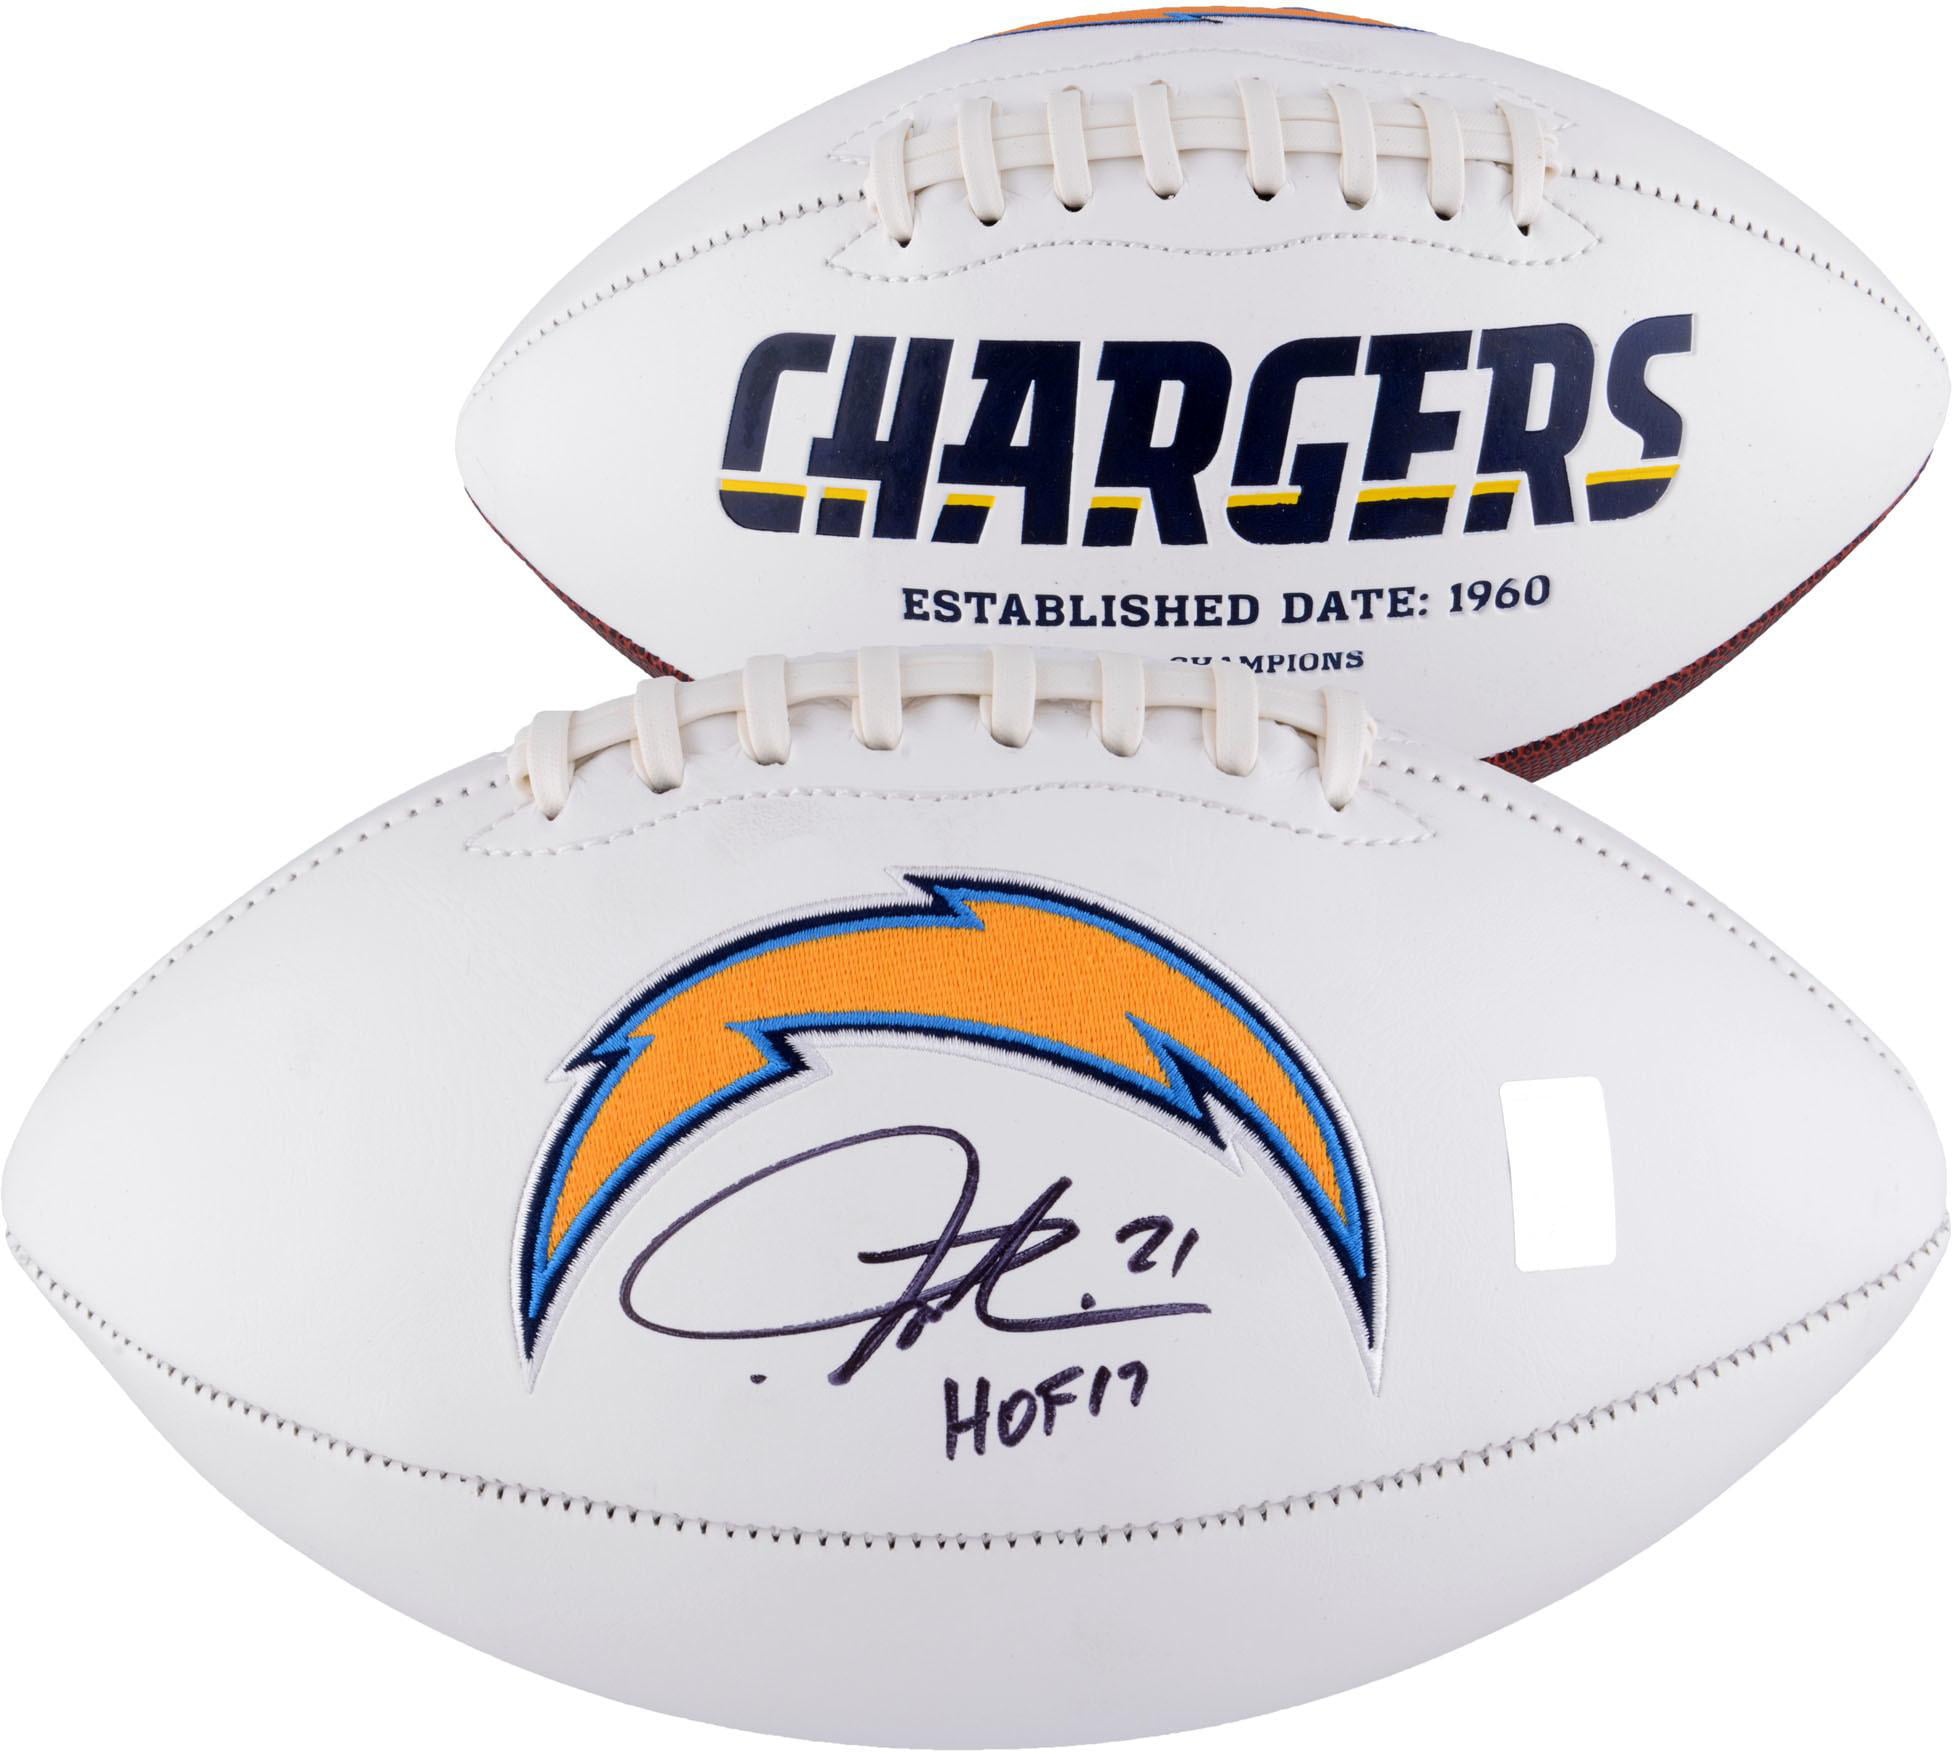 LaDainian Tomlinson Autographed/Signed San Diego Chargers White Full Size Helmet withHOF 17 Inscription 